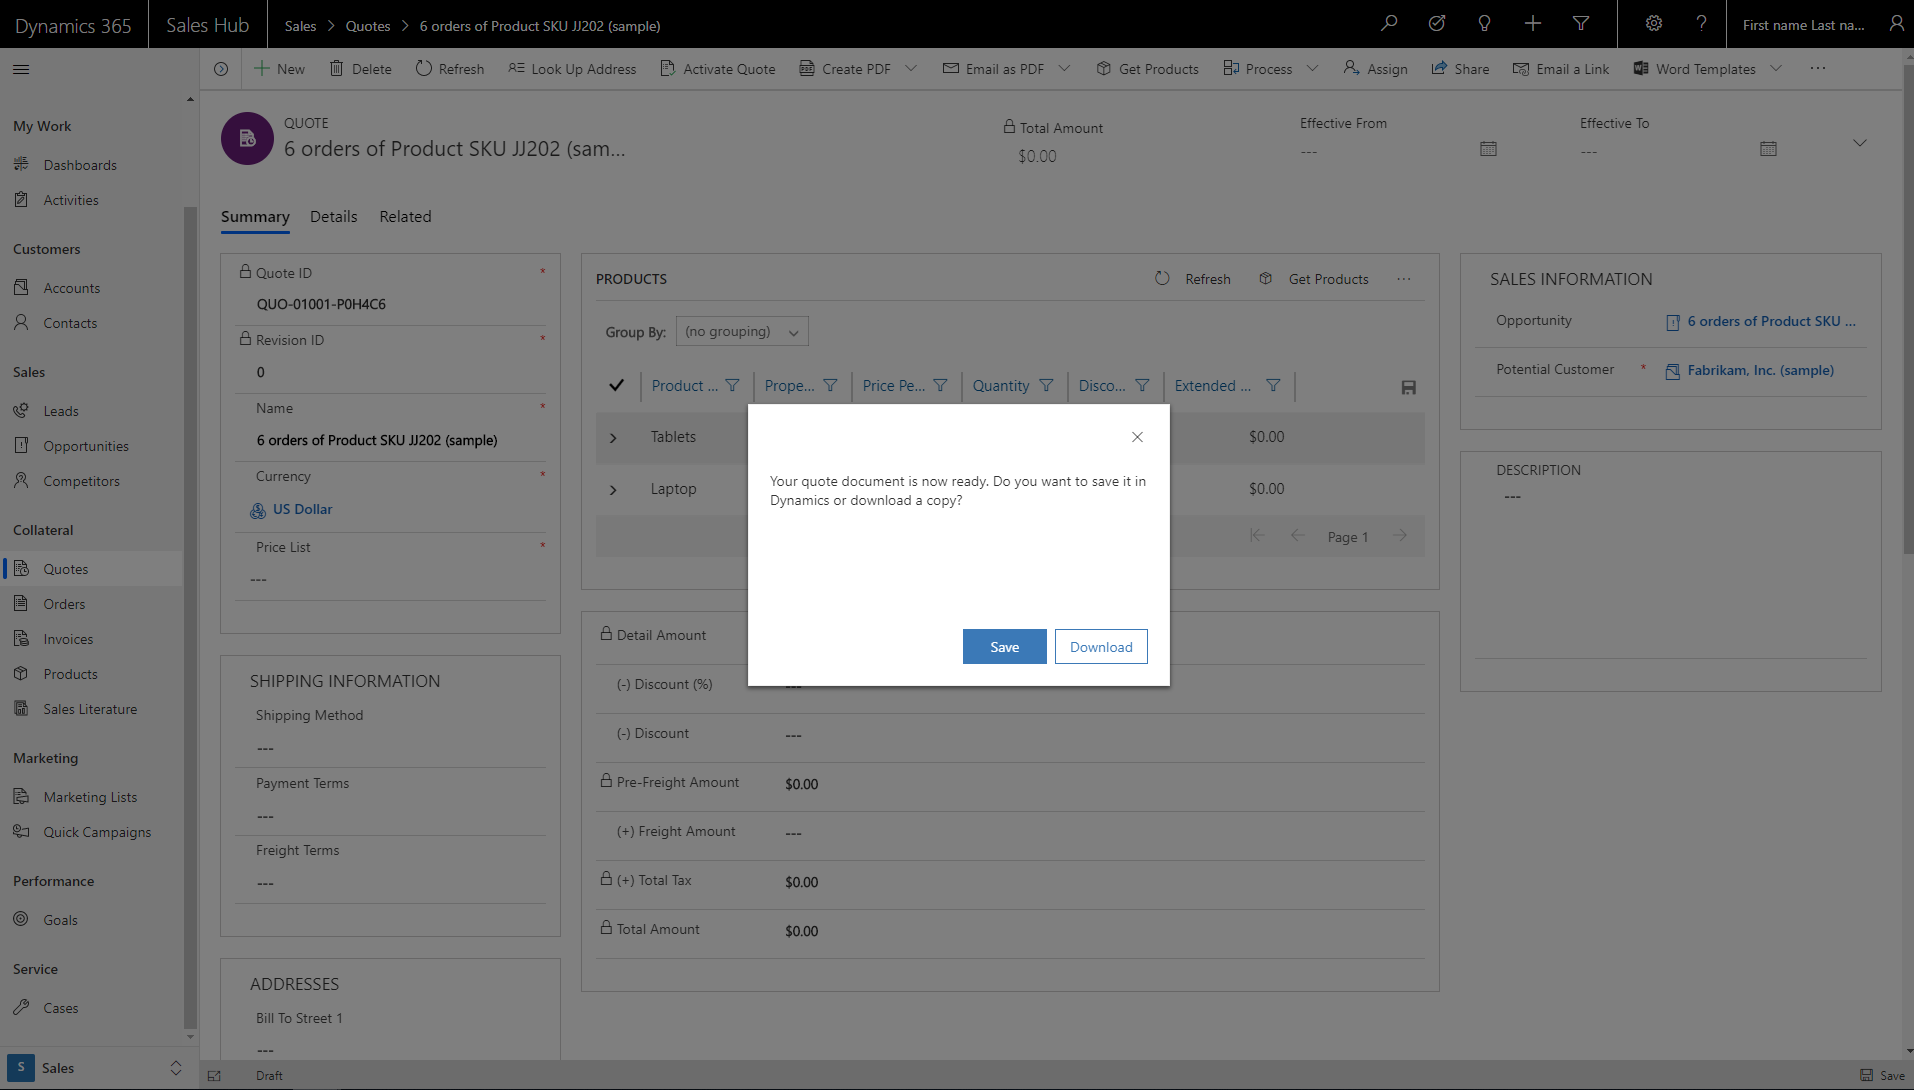 Dialog box to save the PDF to Dynamics 365 Sales or Microsoft SharePoint